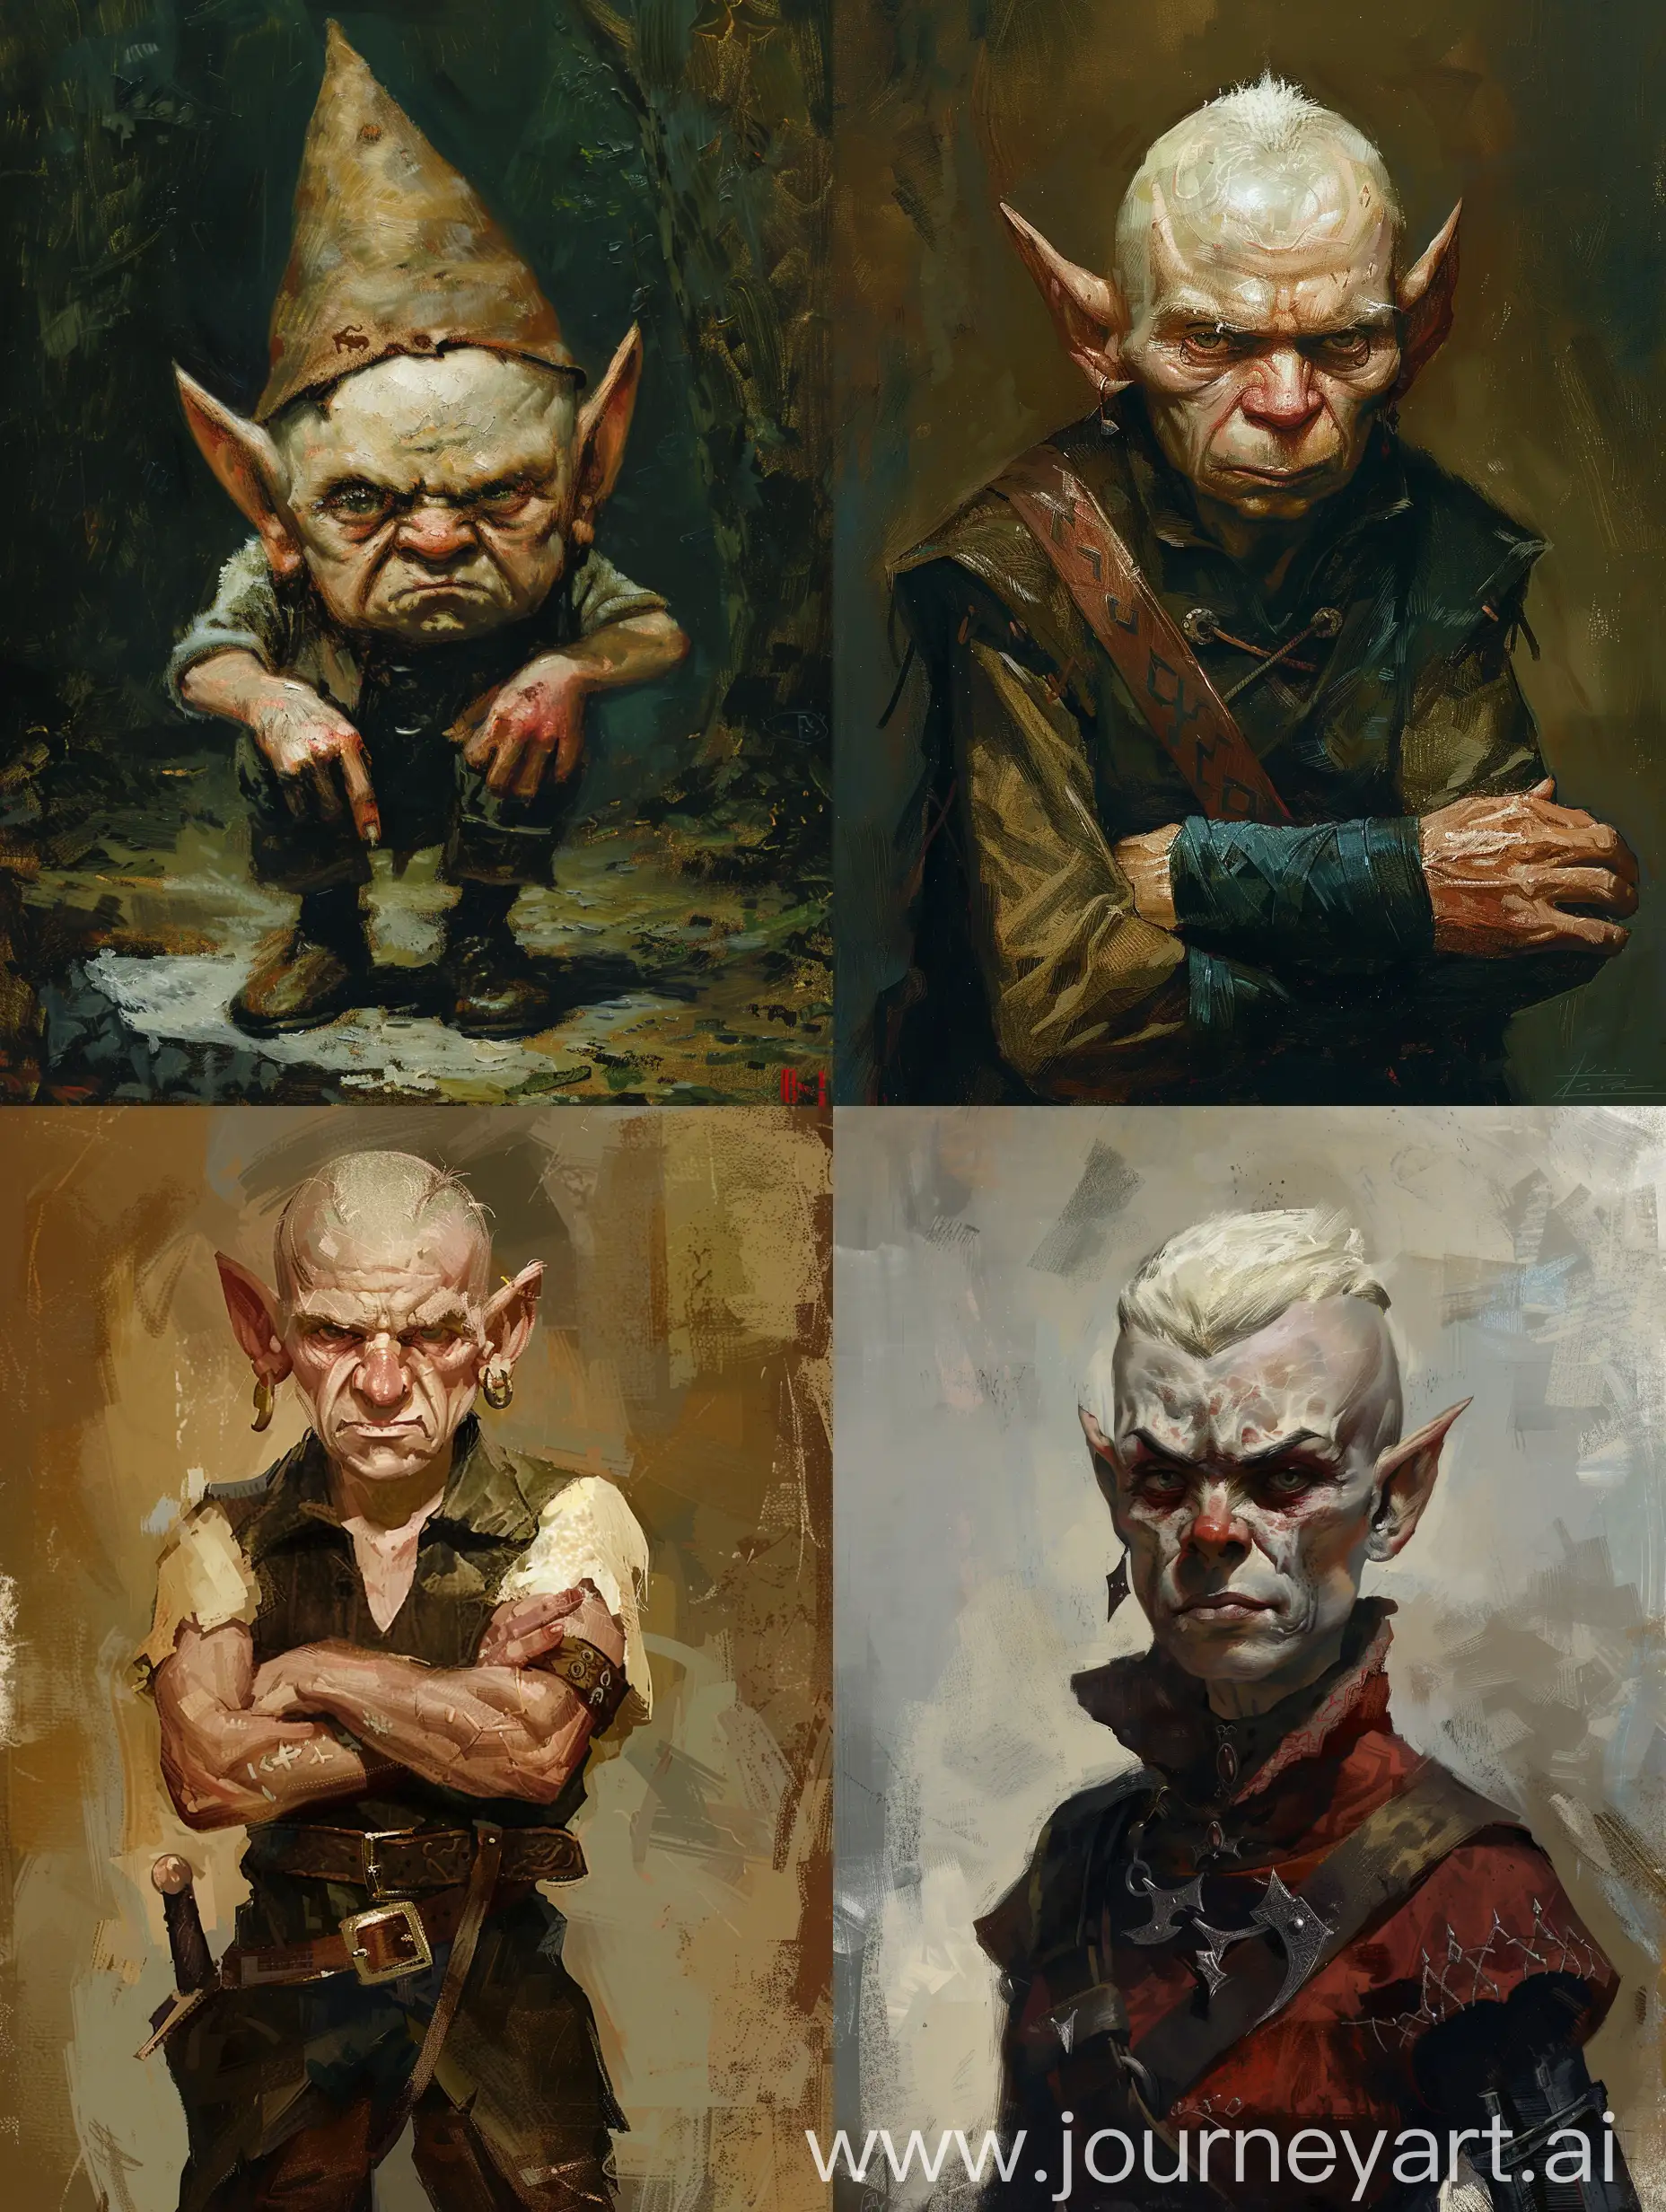 middle aged short person halfgnome, serious face, pale skin, posing for battle, dungeons and dragons, fantasy painting